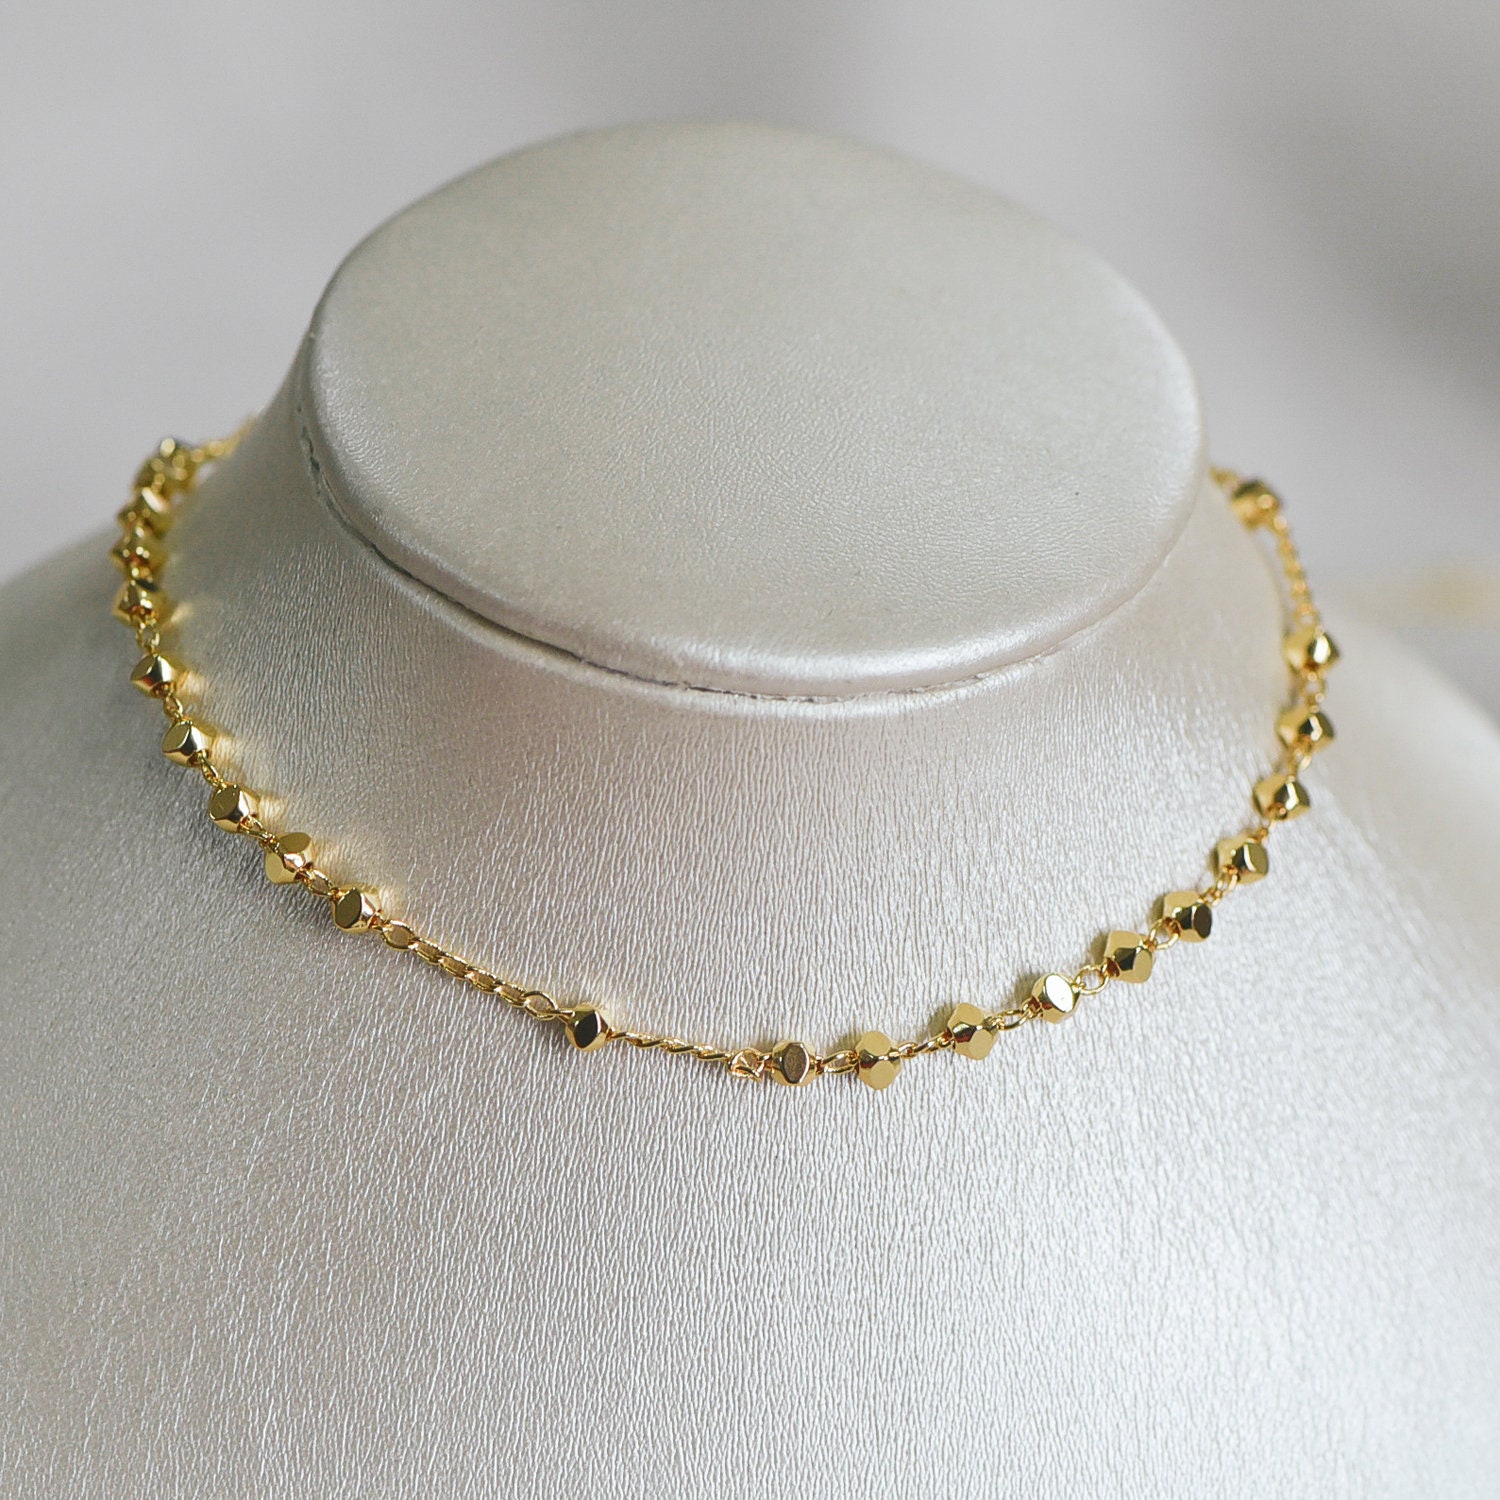 Gold Plated Brass Beaded Chains, 1.5mm Chain With 3mm Faceted Beads,  Jewelry Craft Chain Wholesale LK-193/ 1 Meter3.3 Ft 